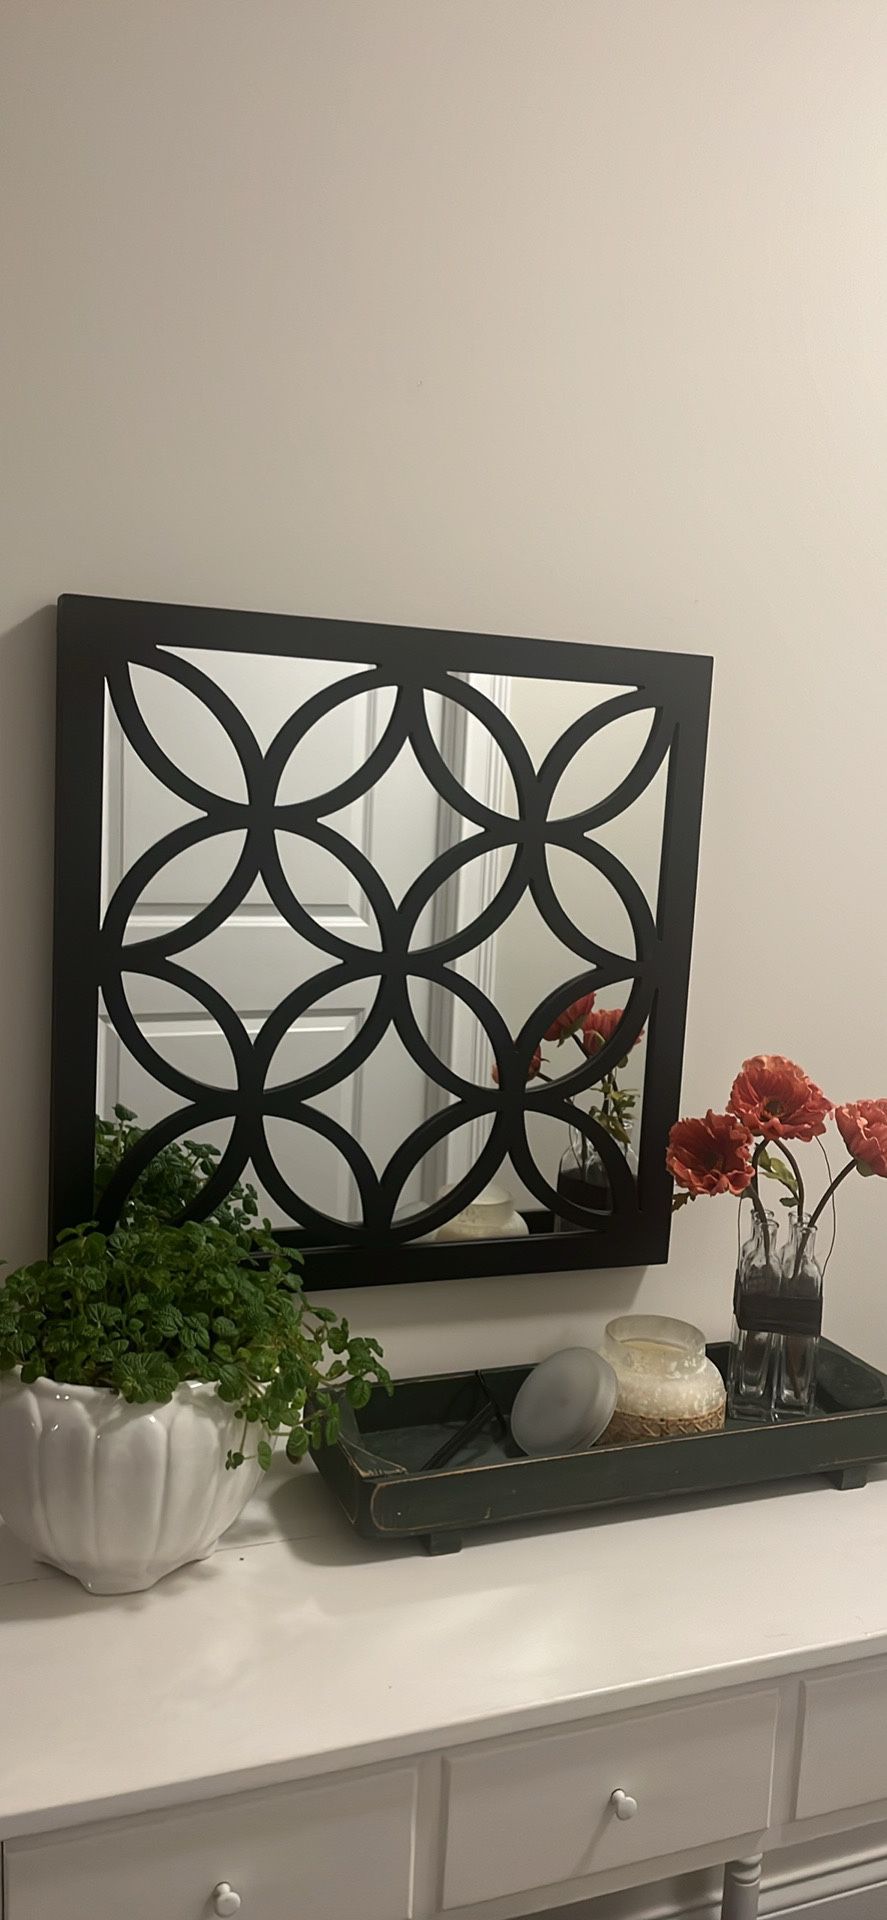 2 Ft Square Mirror With Geometric Accent 